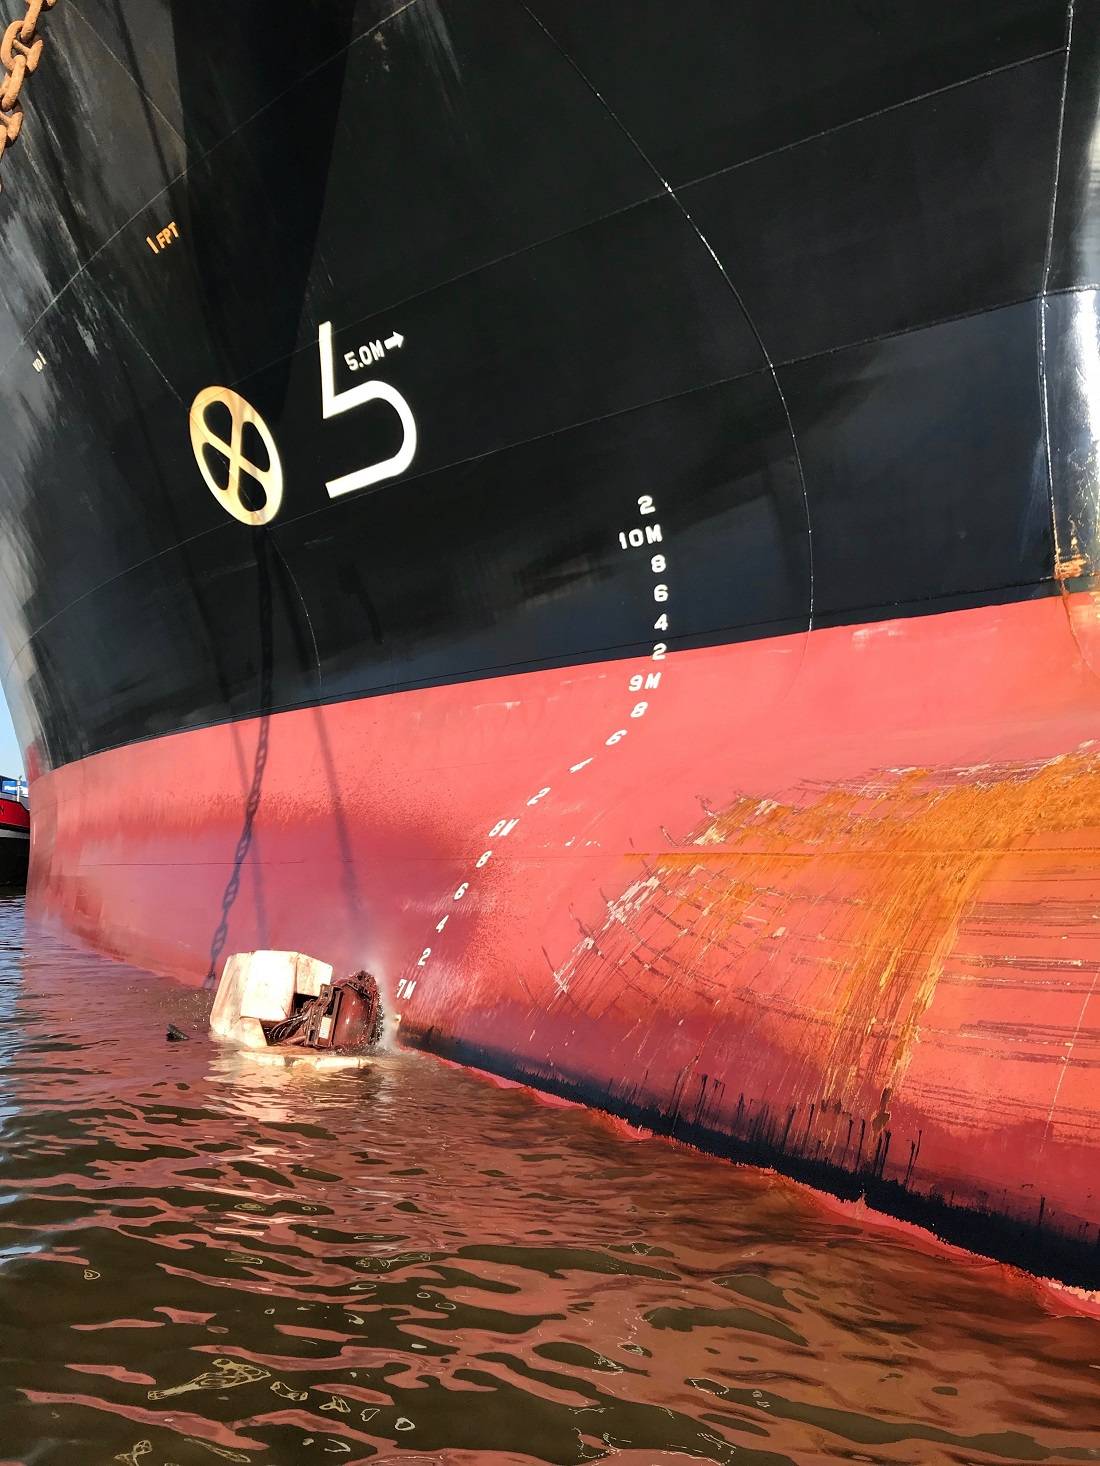 Hull Cleaning Oil Response